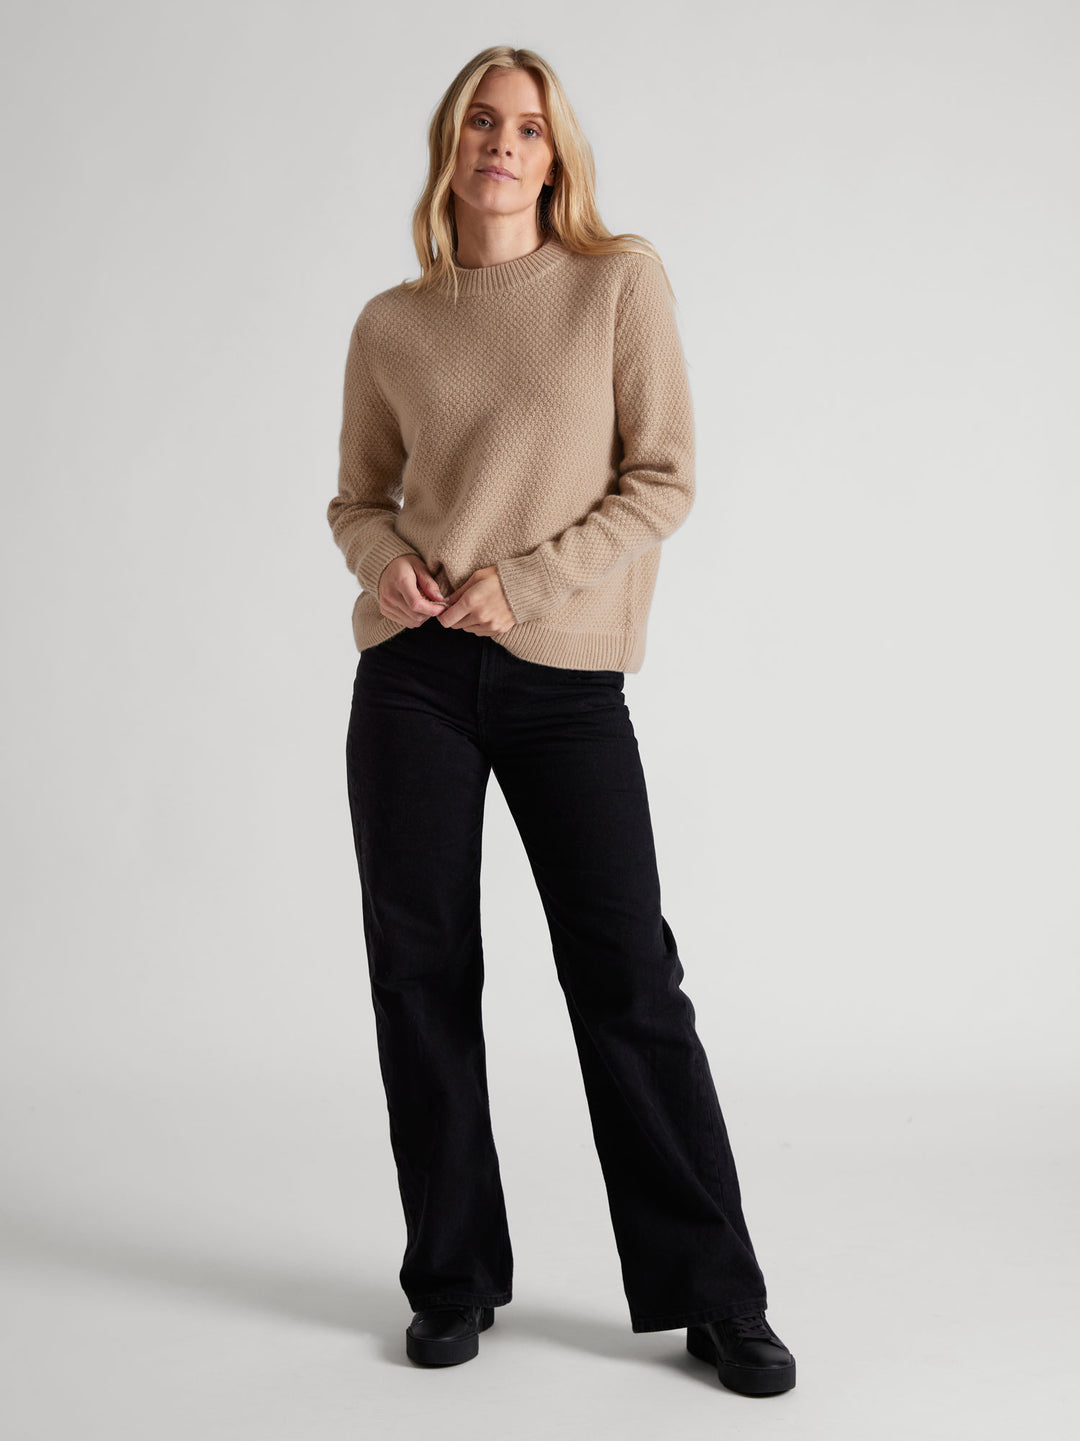 Seed stiched cashmere sweater  "Pearl" in 100% pure cashmere. Scandinavian design by Kashmina. Color: Sand.